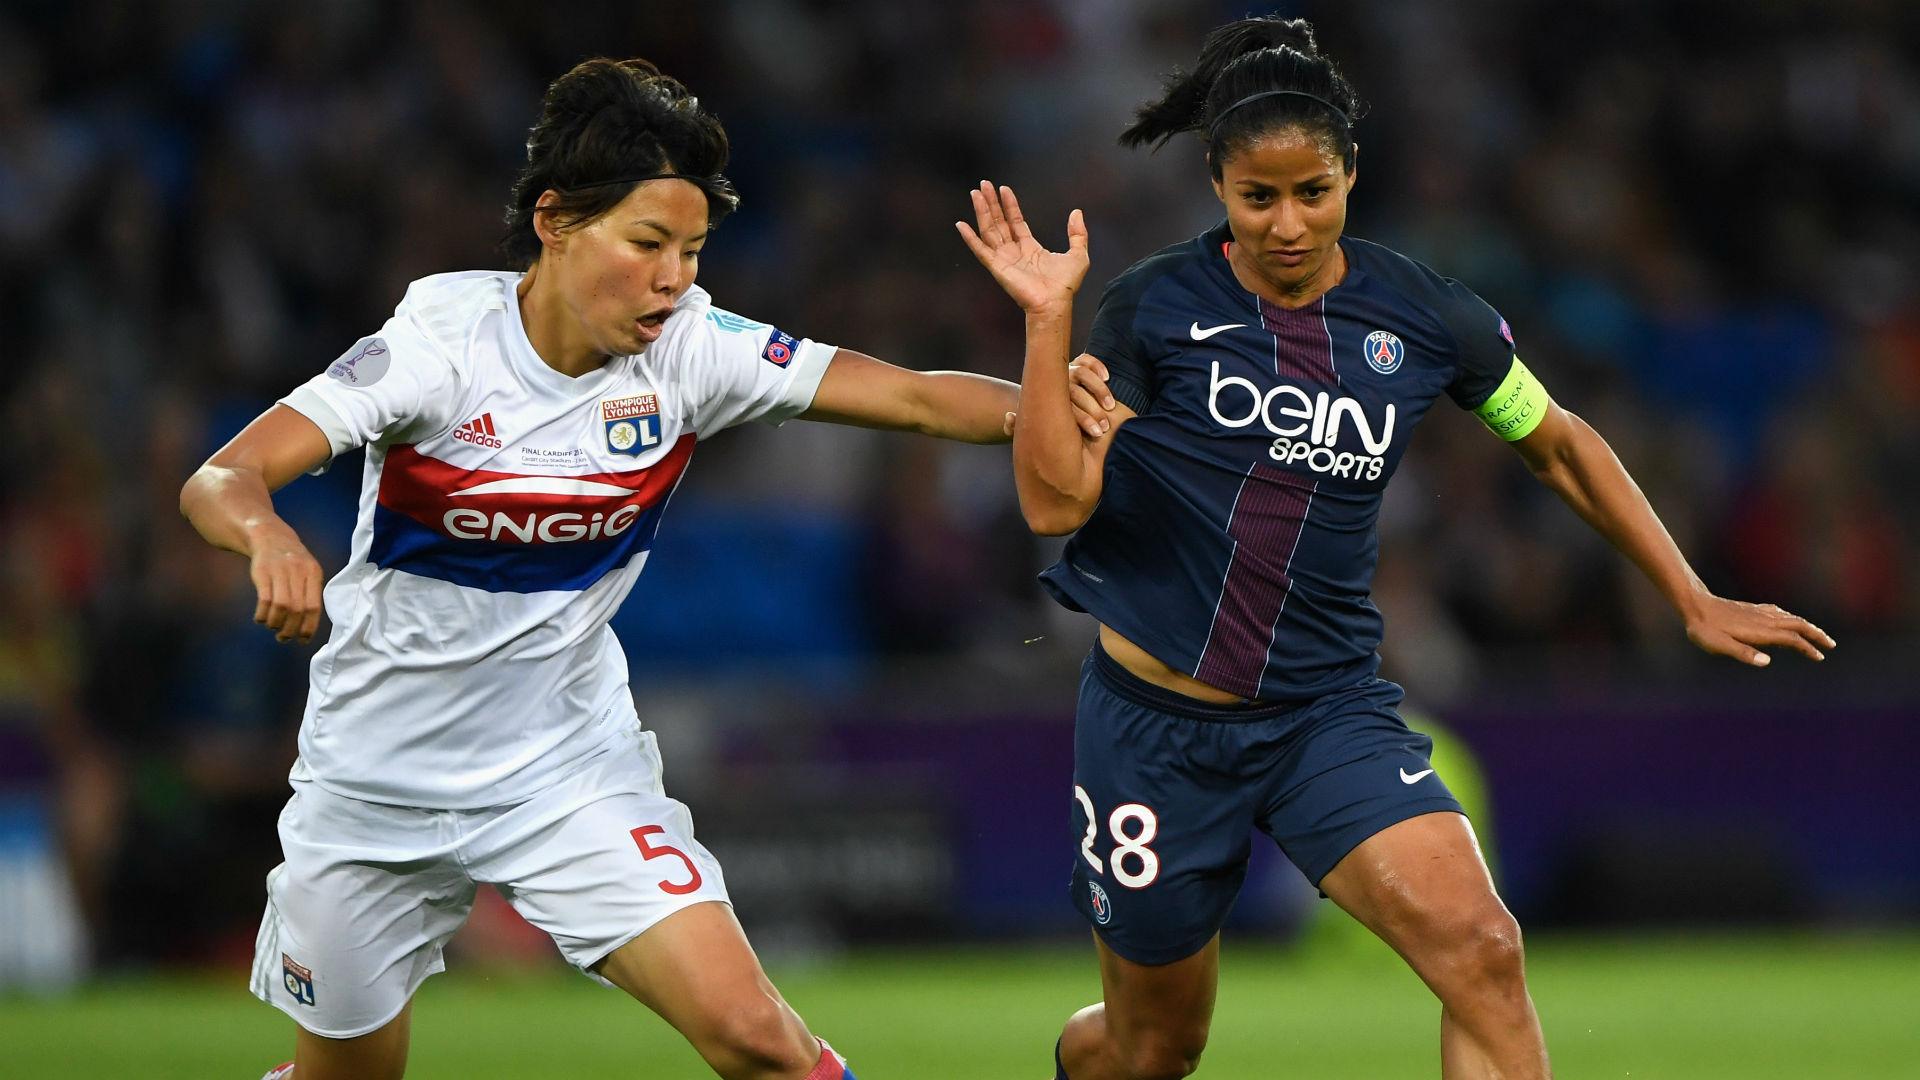 Lyon's women show Real Madrid the path in claiming consecutive